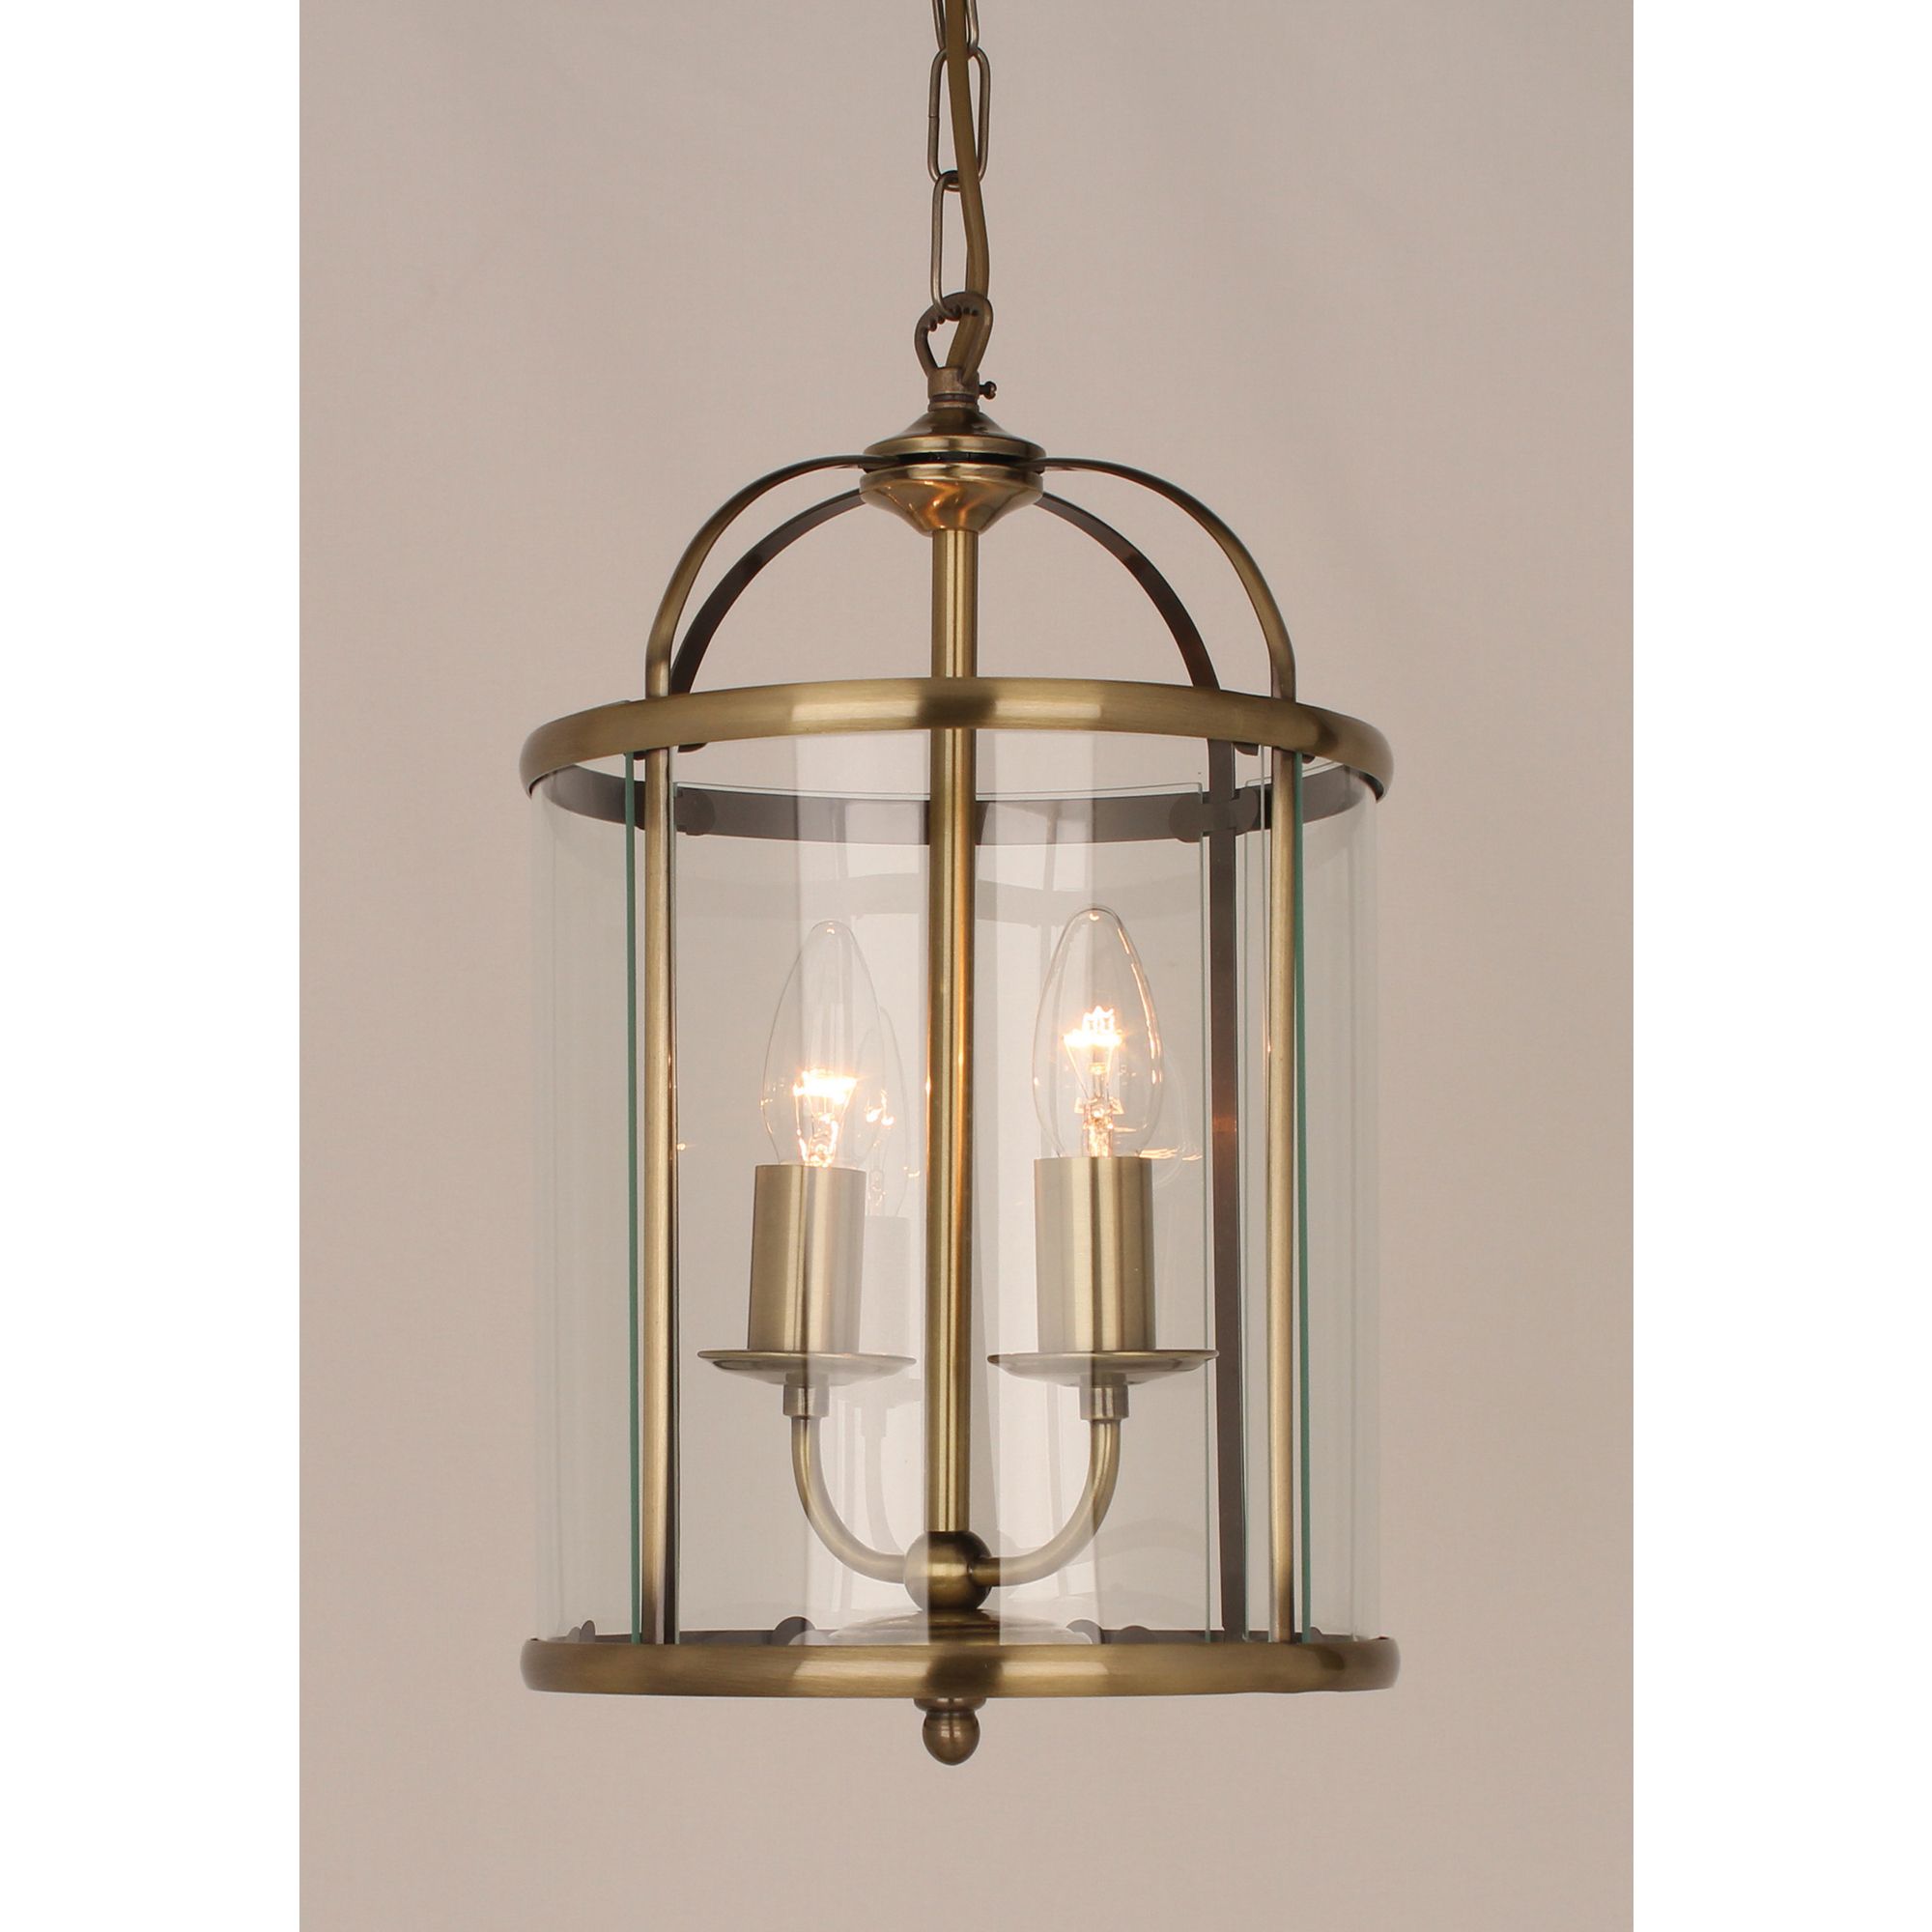 Most Recently Released Impex Lighting Lg77132/ab Orly 2 Light Ceiling Lantern In Antique Brass  Finish 48986 – Indoor Lighting From Castlegate Lights Uk In Two Light Lantern Chandeliers (View 5 of 15)